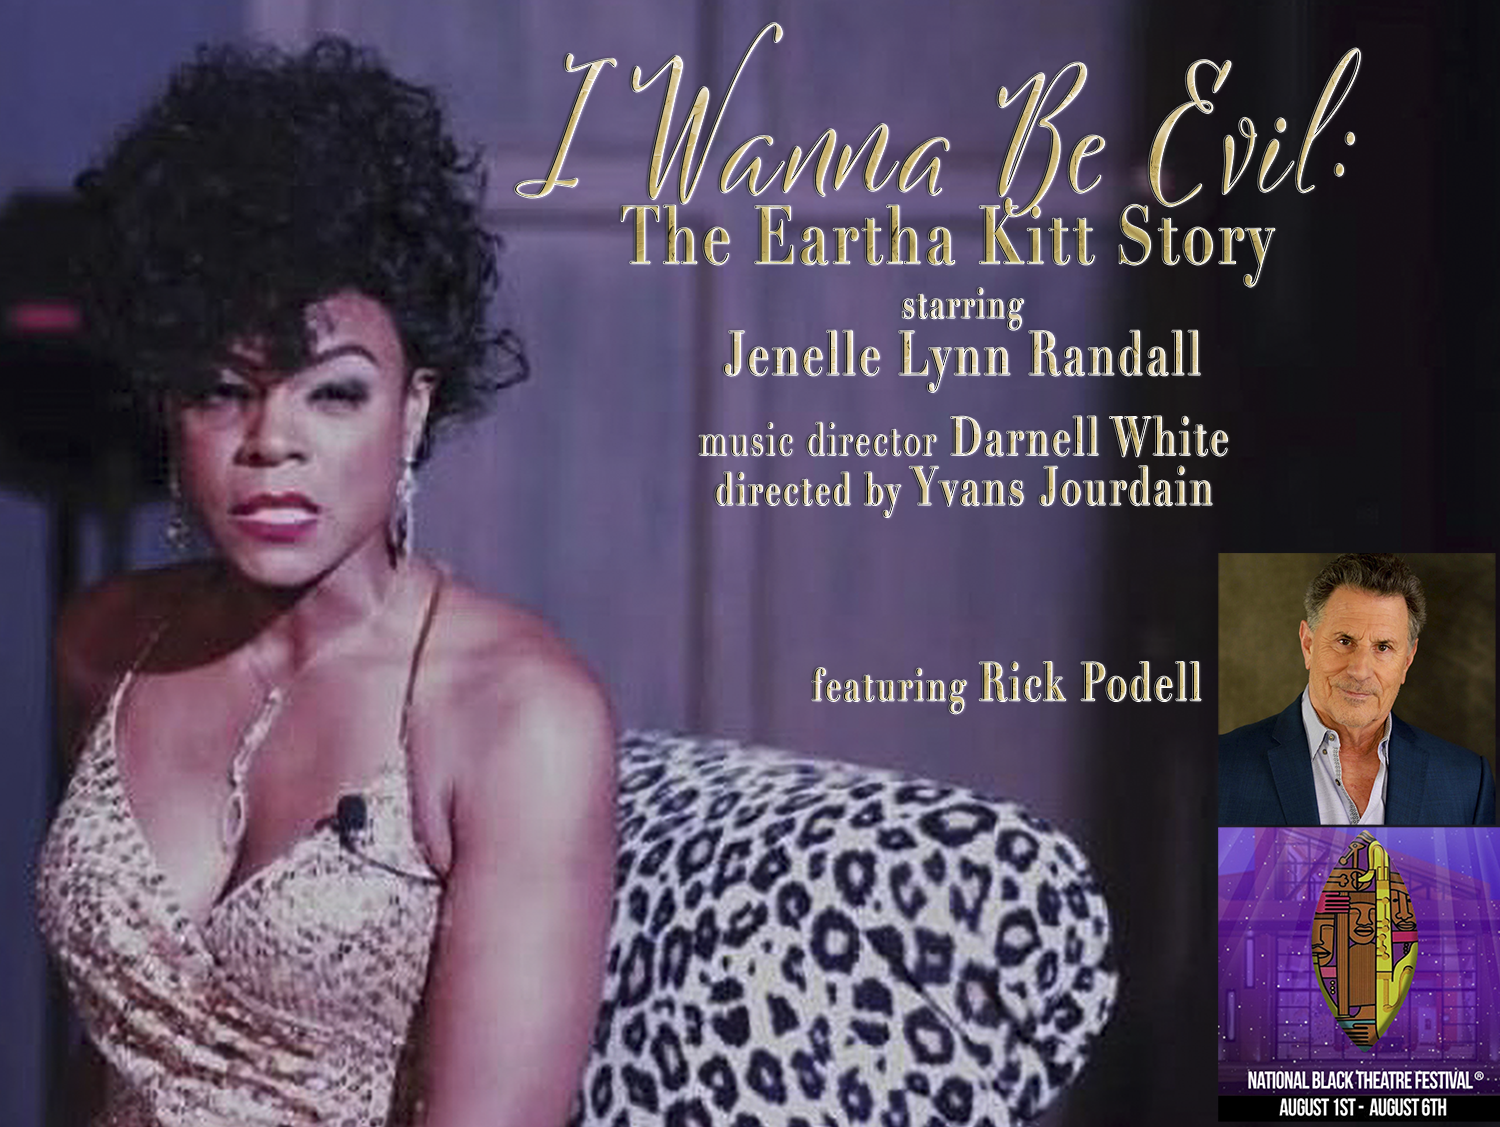 I WANNA BE EVIL: THE EARTHA KITT STORY To Play At The National Black Theatre Festival, August 2-5 